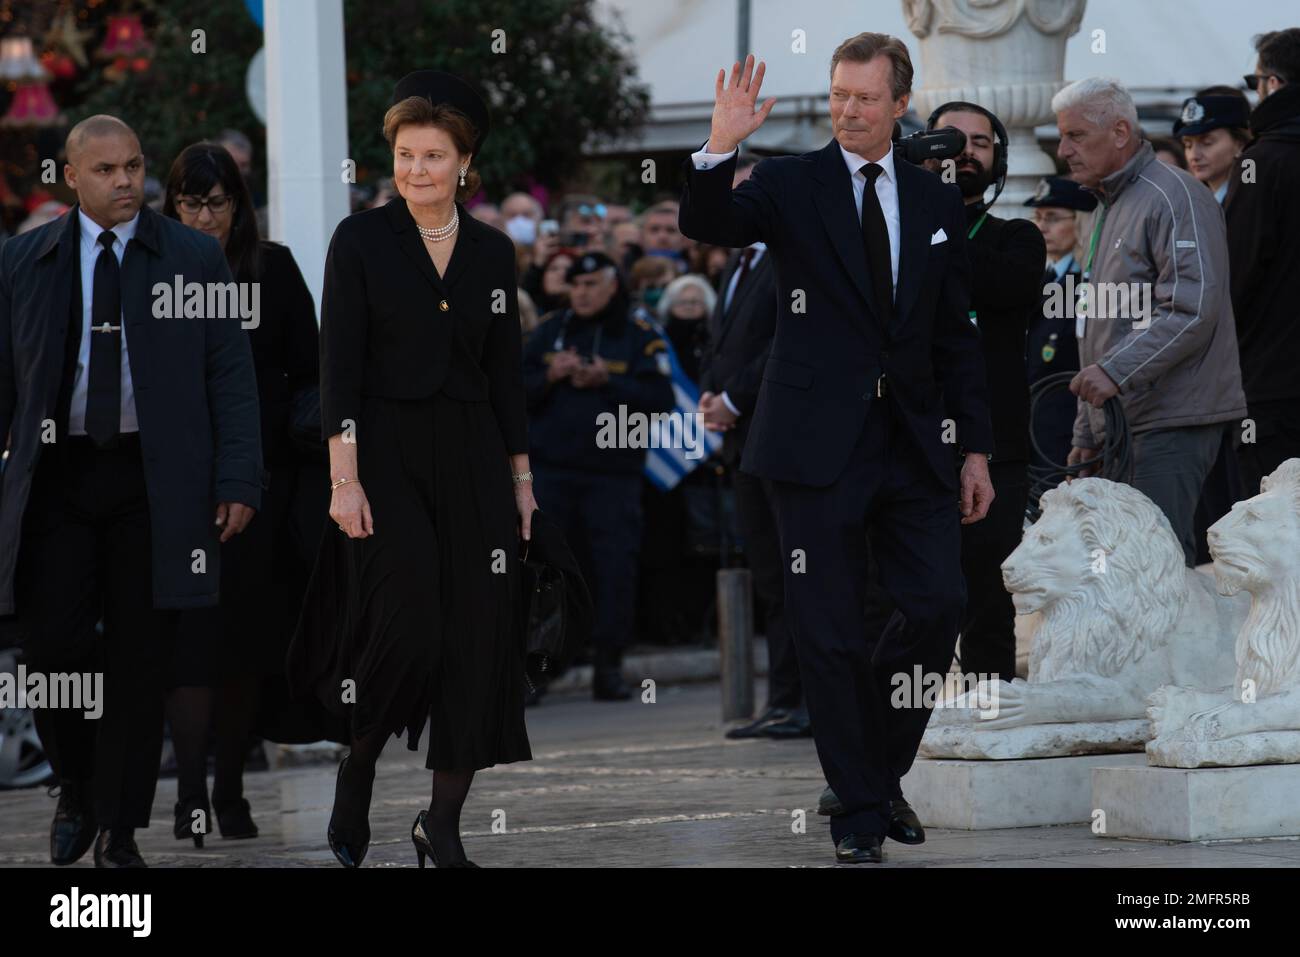 Athens, Greece. 16th January 2023. Grand Duchess Maria Teresa of Luxemburg and Grand Duke Henri of Luxemburg arrive for the funeral of the former King Constantine II of Greece at the Metropolitan Cathedral of Athens. Credit: Nicolas Koutsokostas/Alamy Stock Photo. Stock Photo